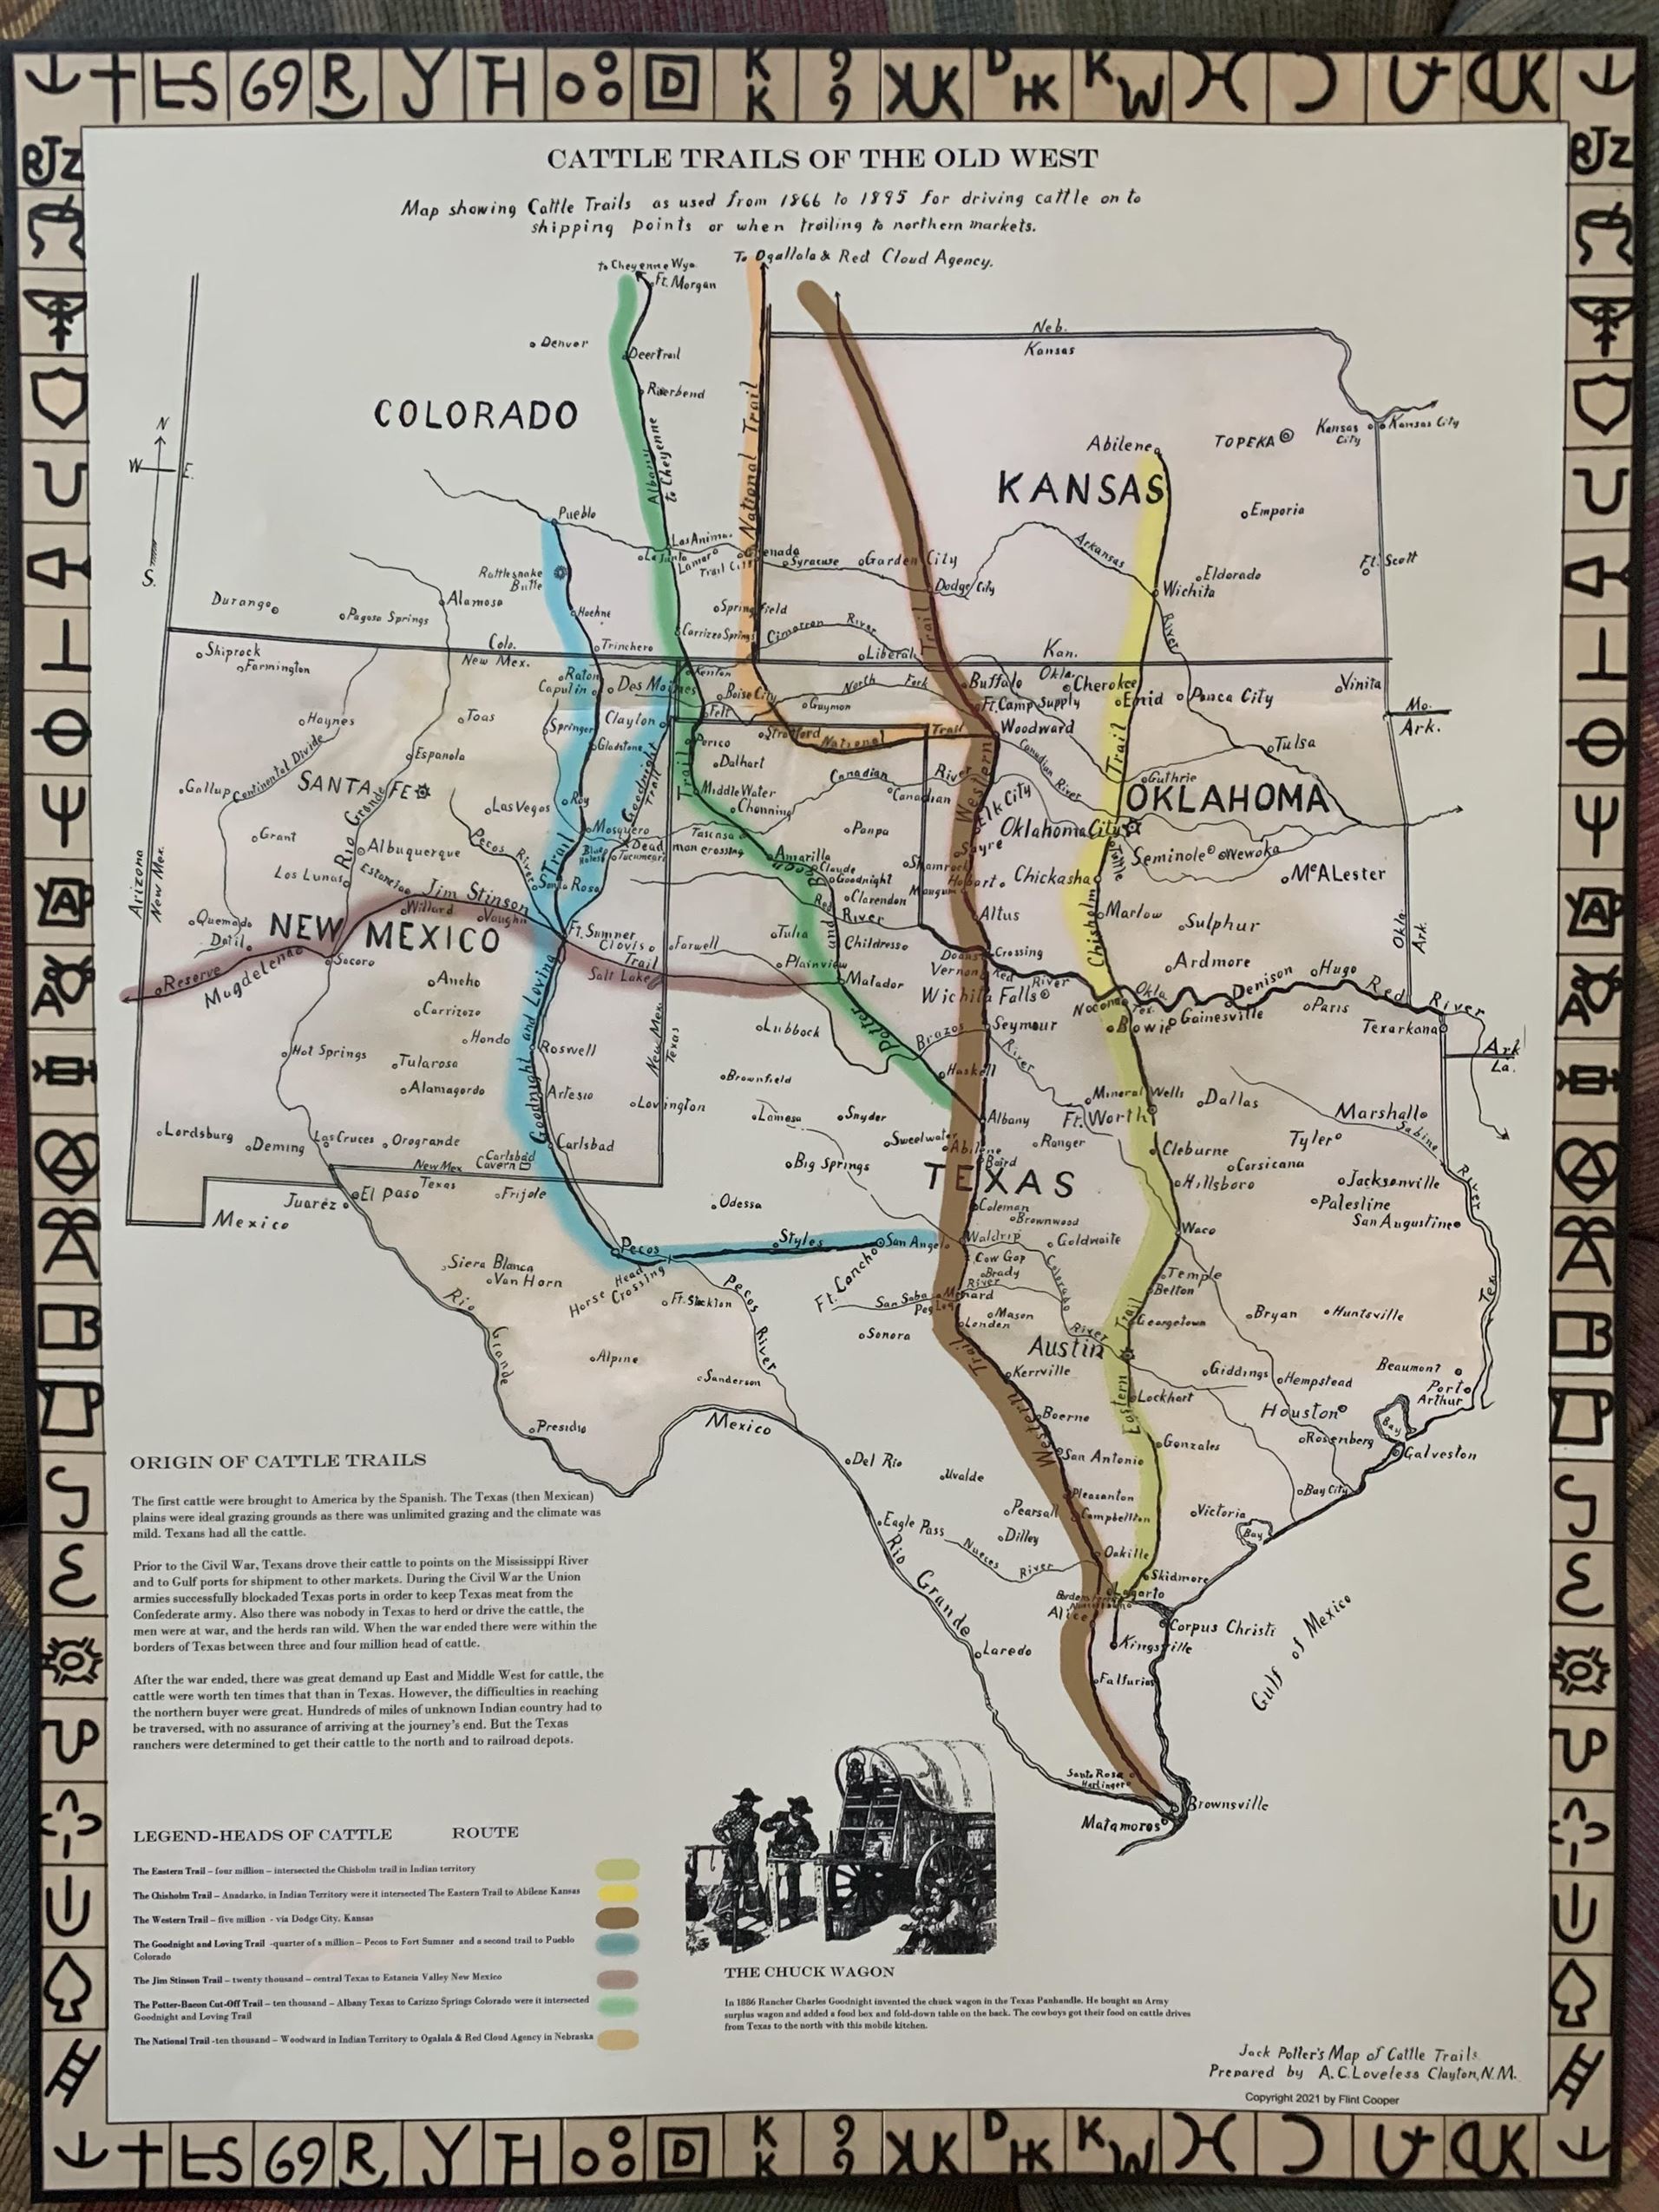 Cattle Trails of the Old West Map